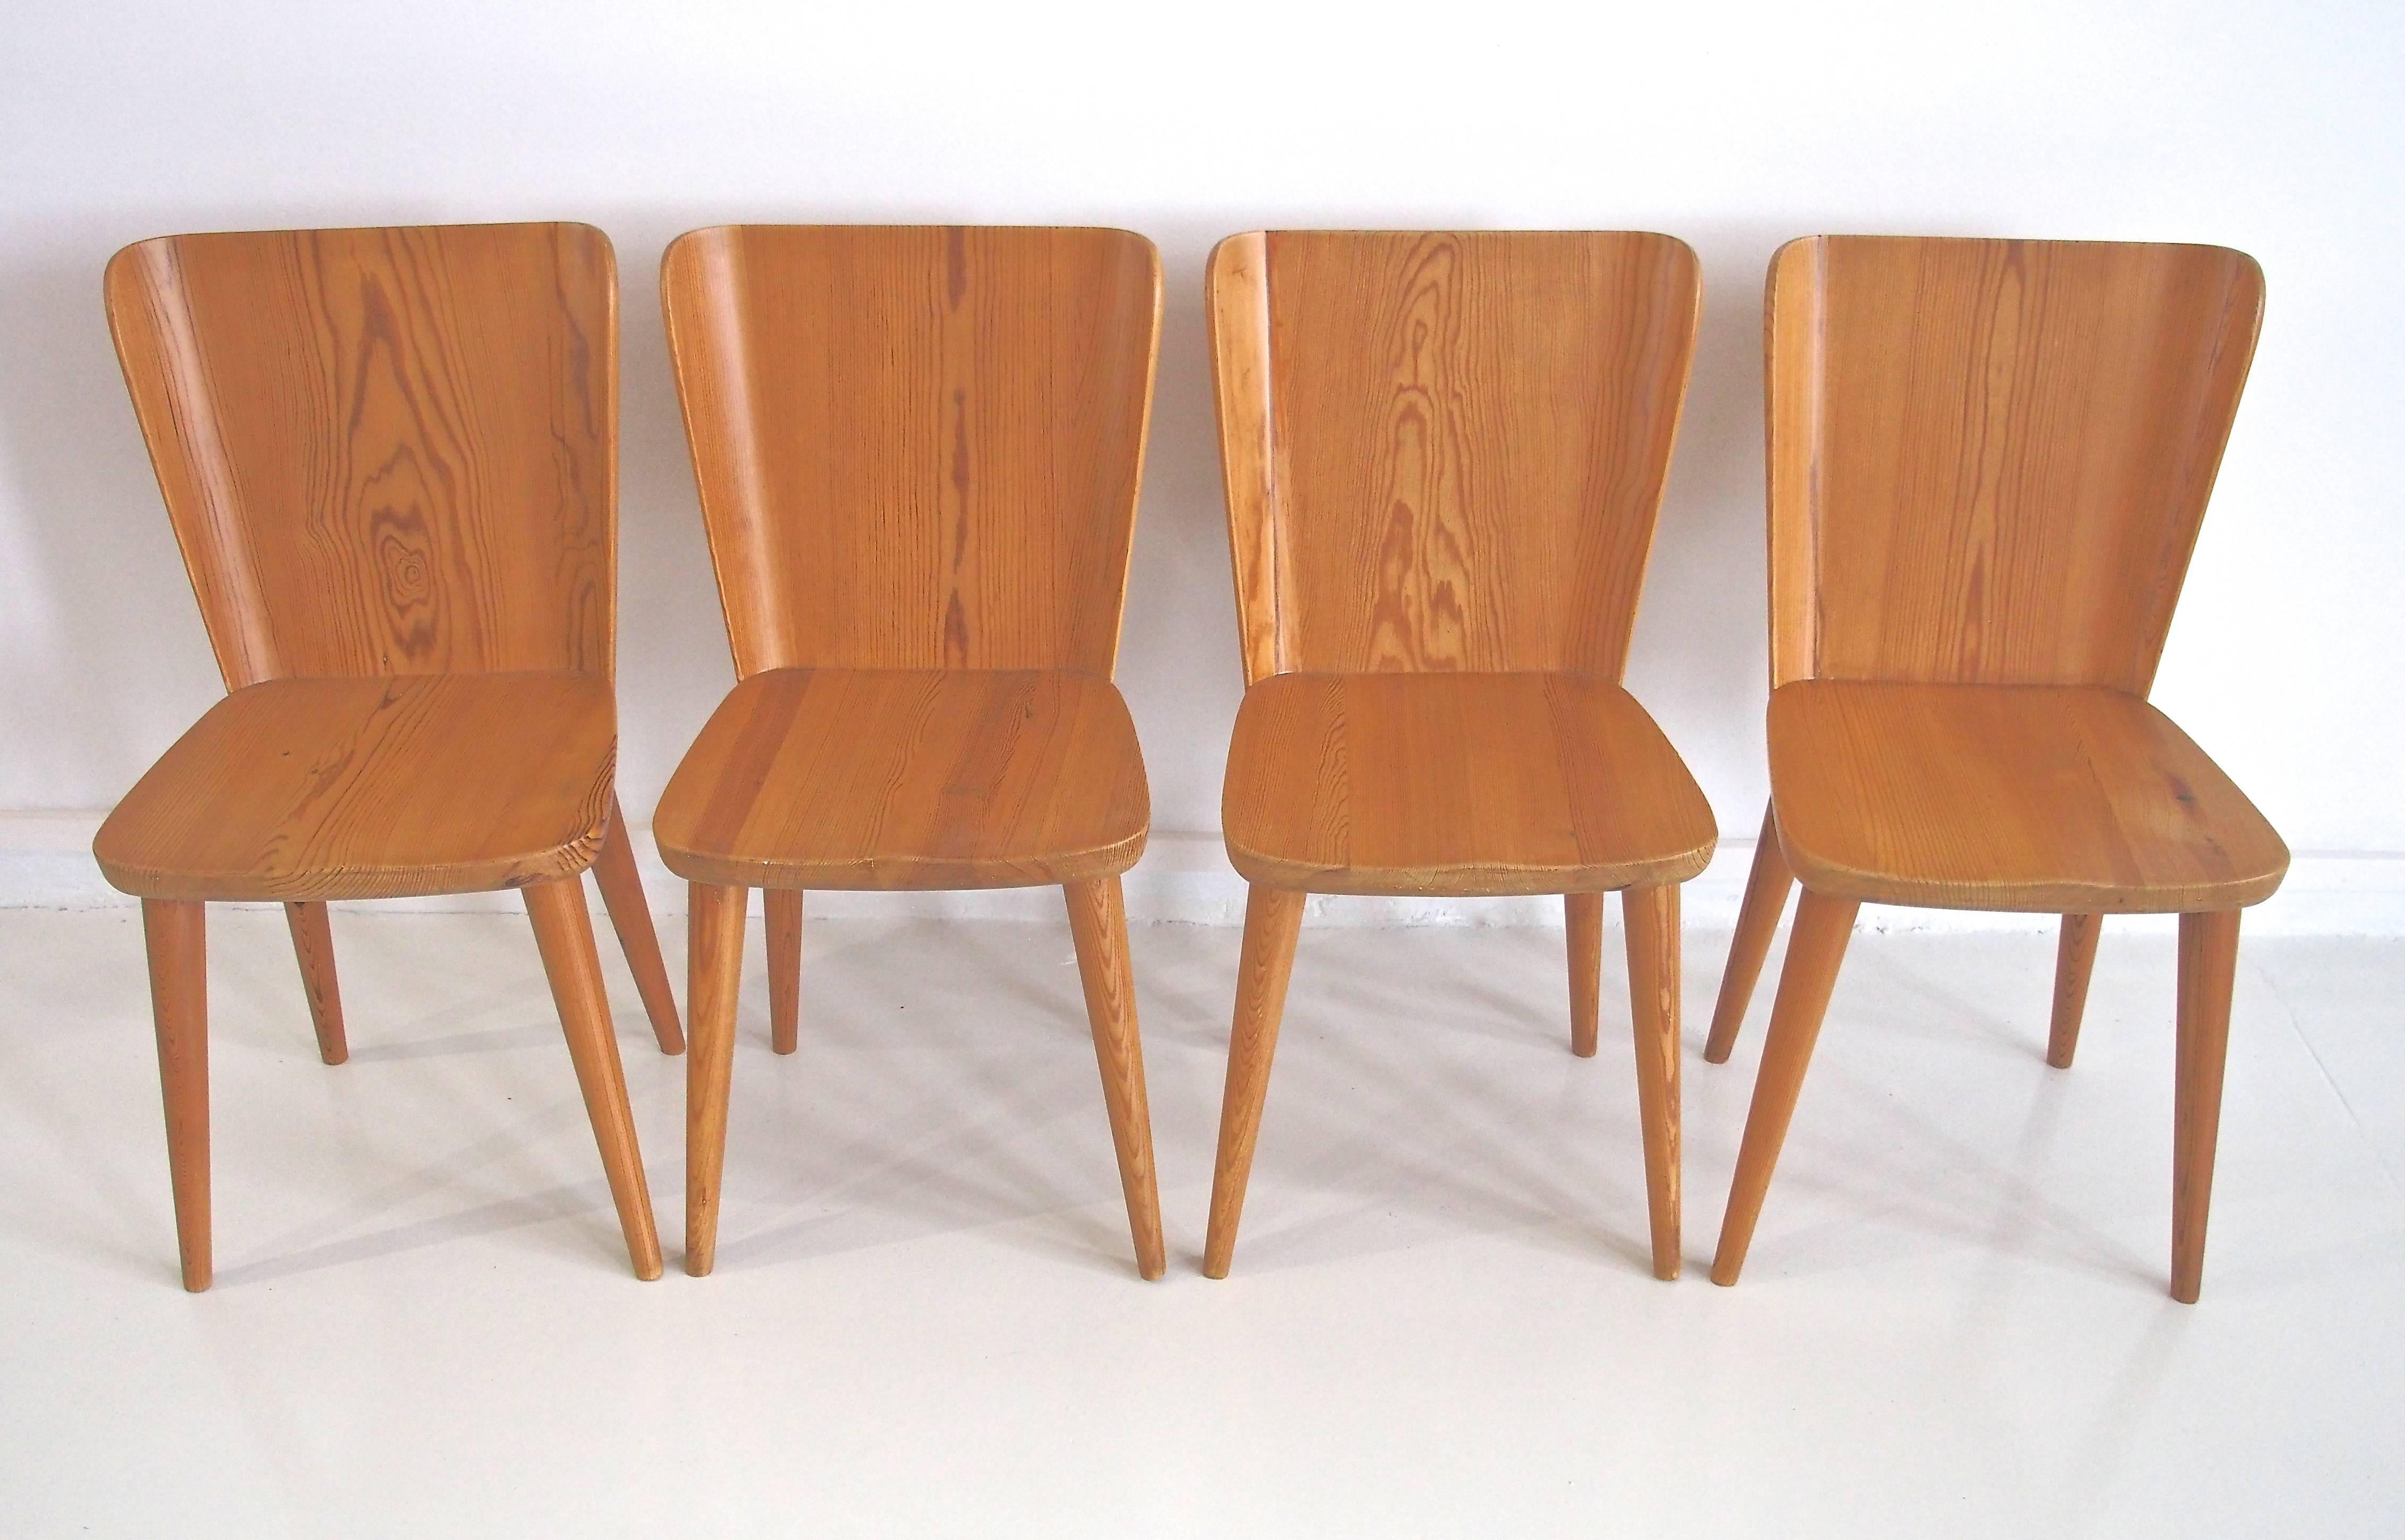 20th Century Goran Malmvall Dining Table and Four Chairs by Karl Andersson & Soner